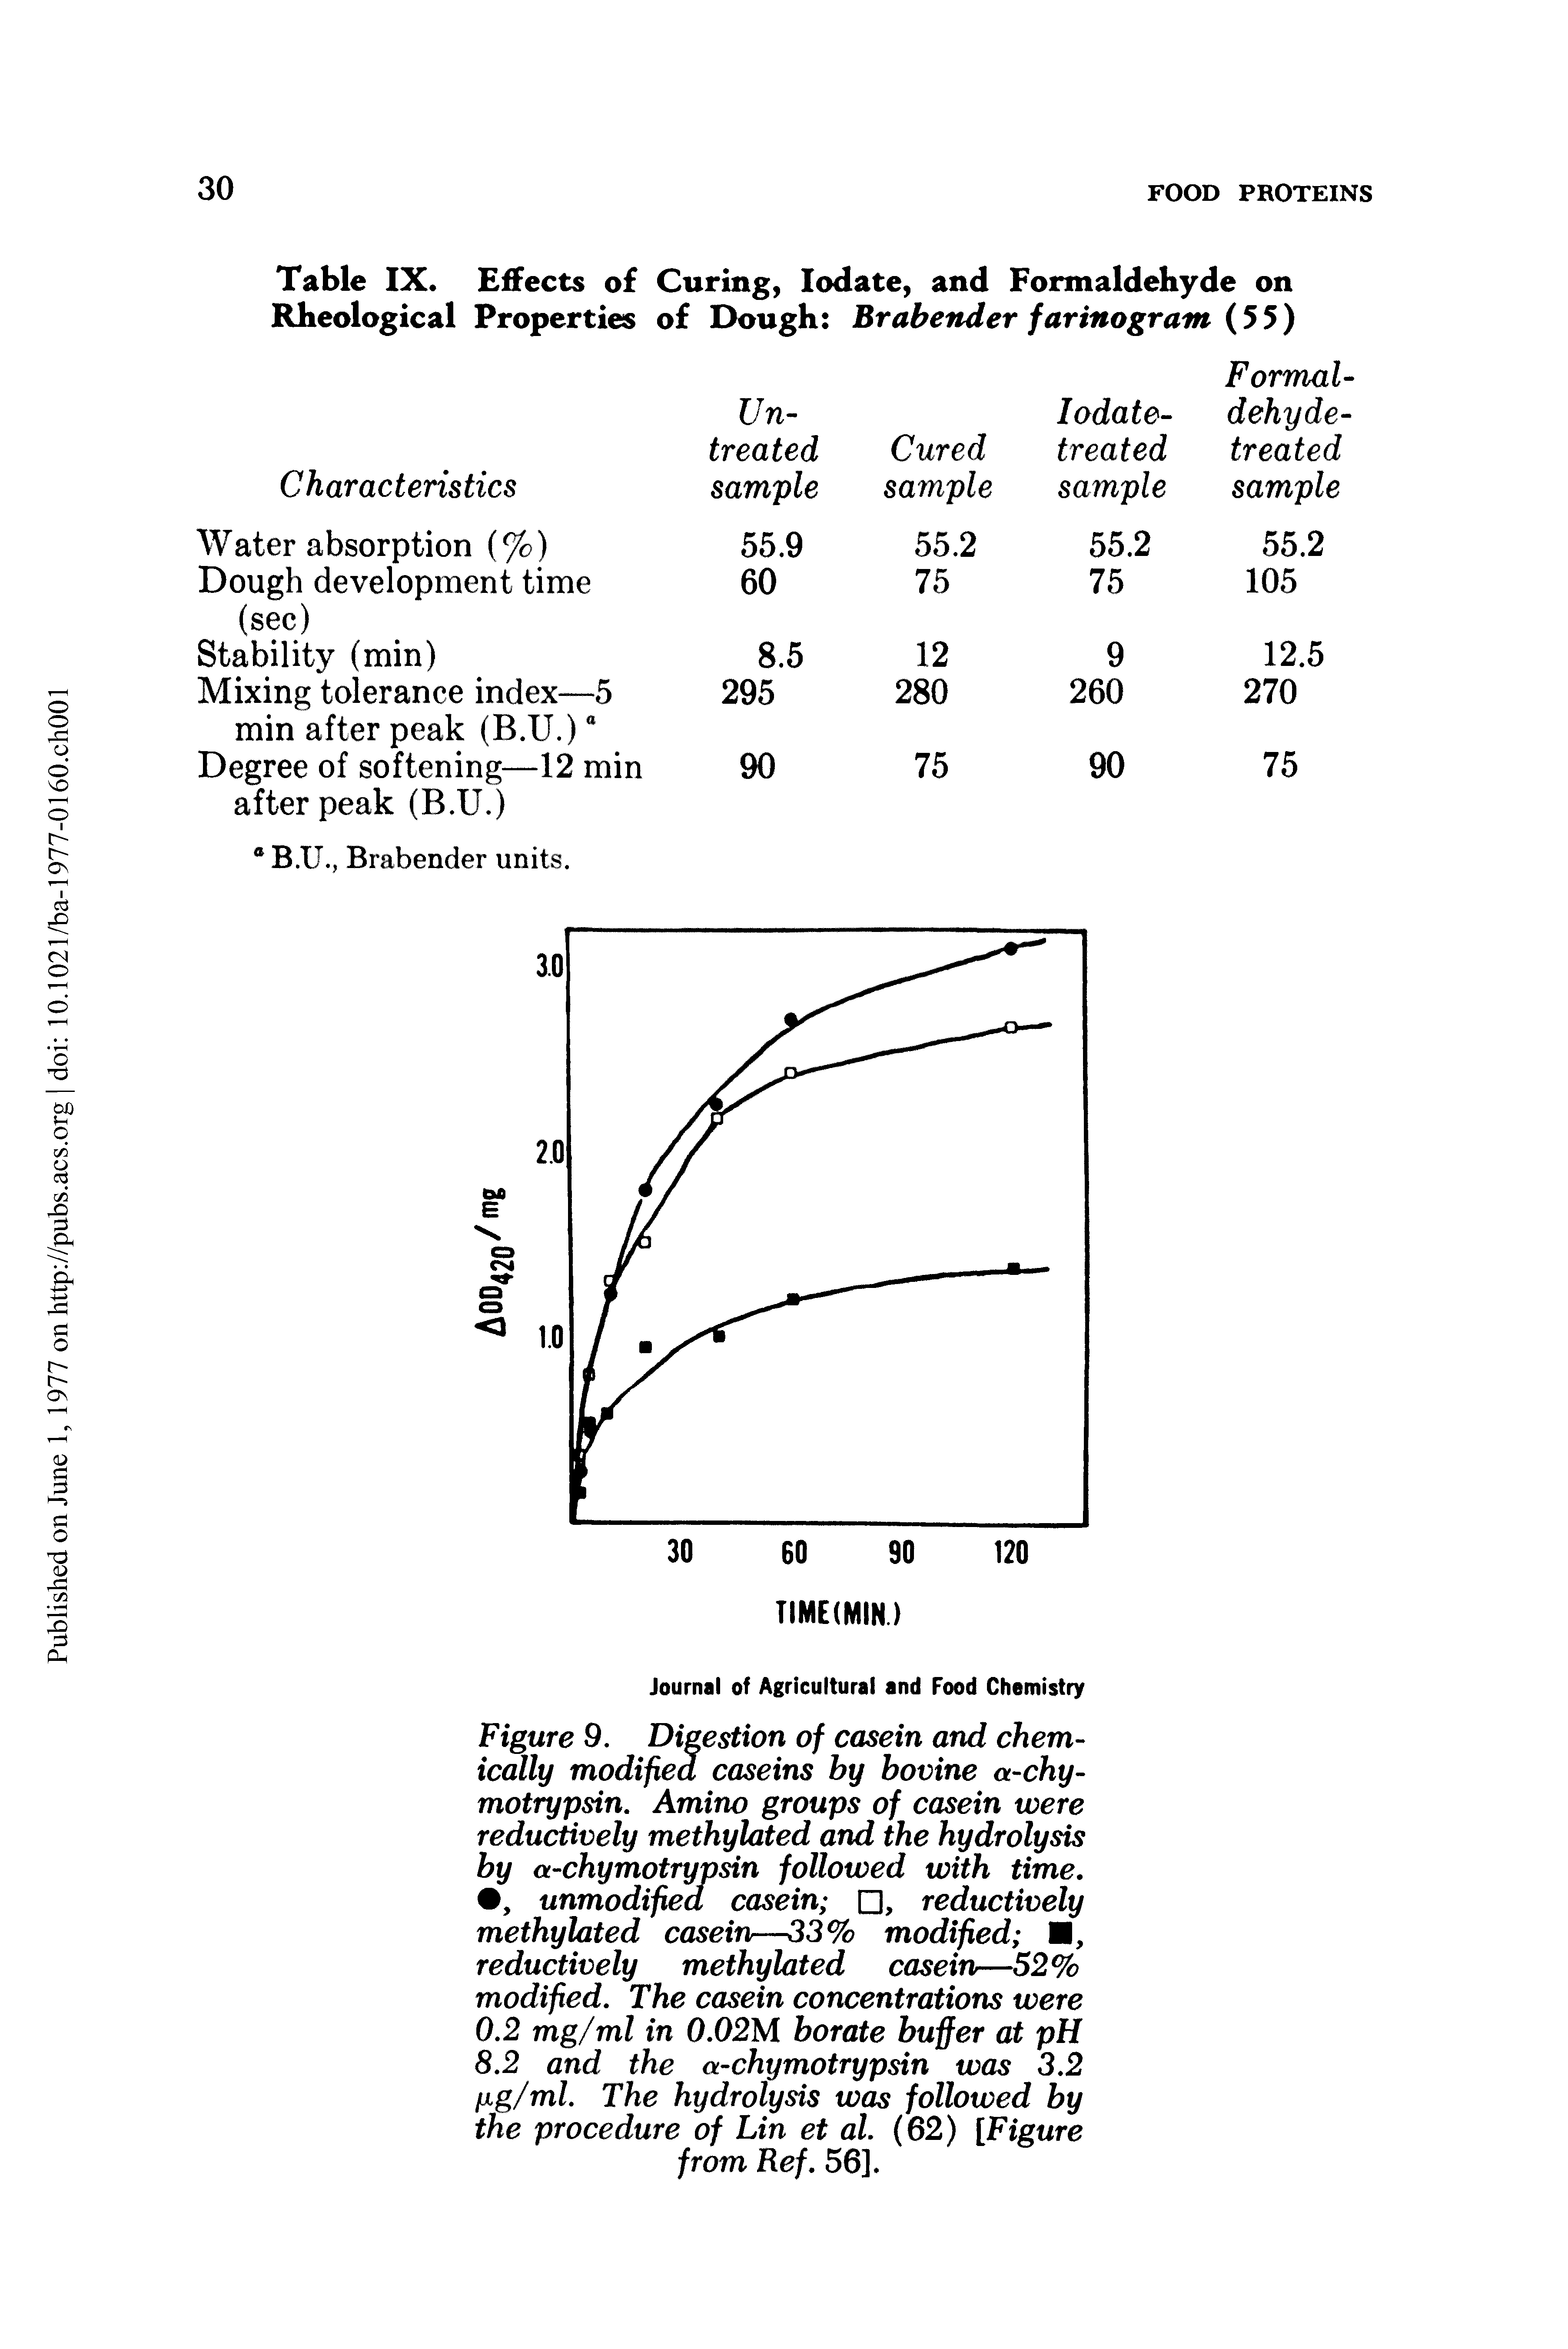 Figure 9. Digestion of casein and chemically modified caseins by bovine a-chy-motrypsin. Amino groups of casein were reductively methylated and the hydrolysis by a-chymotrypsin followed with time., unmodified casein , reductively methylated casein—33% modified , reductively methylated casein—52% modified. The casein concentrations were 0.2 mg/ml in 0.02M borate buffer at pH 8.2 and the a-chymotrypsin was 3.2 fjig/ml. The hydrolysis was followed by the procedure of Lin et al. (62) [Figure from Ref. 56].